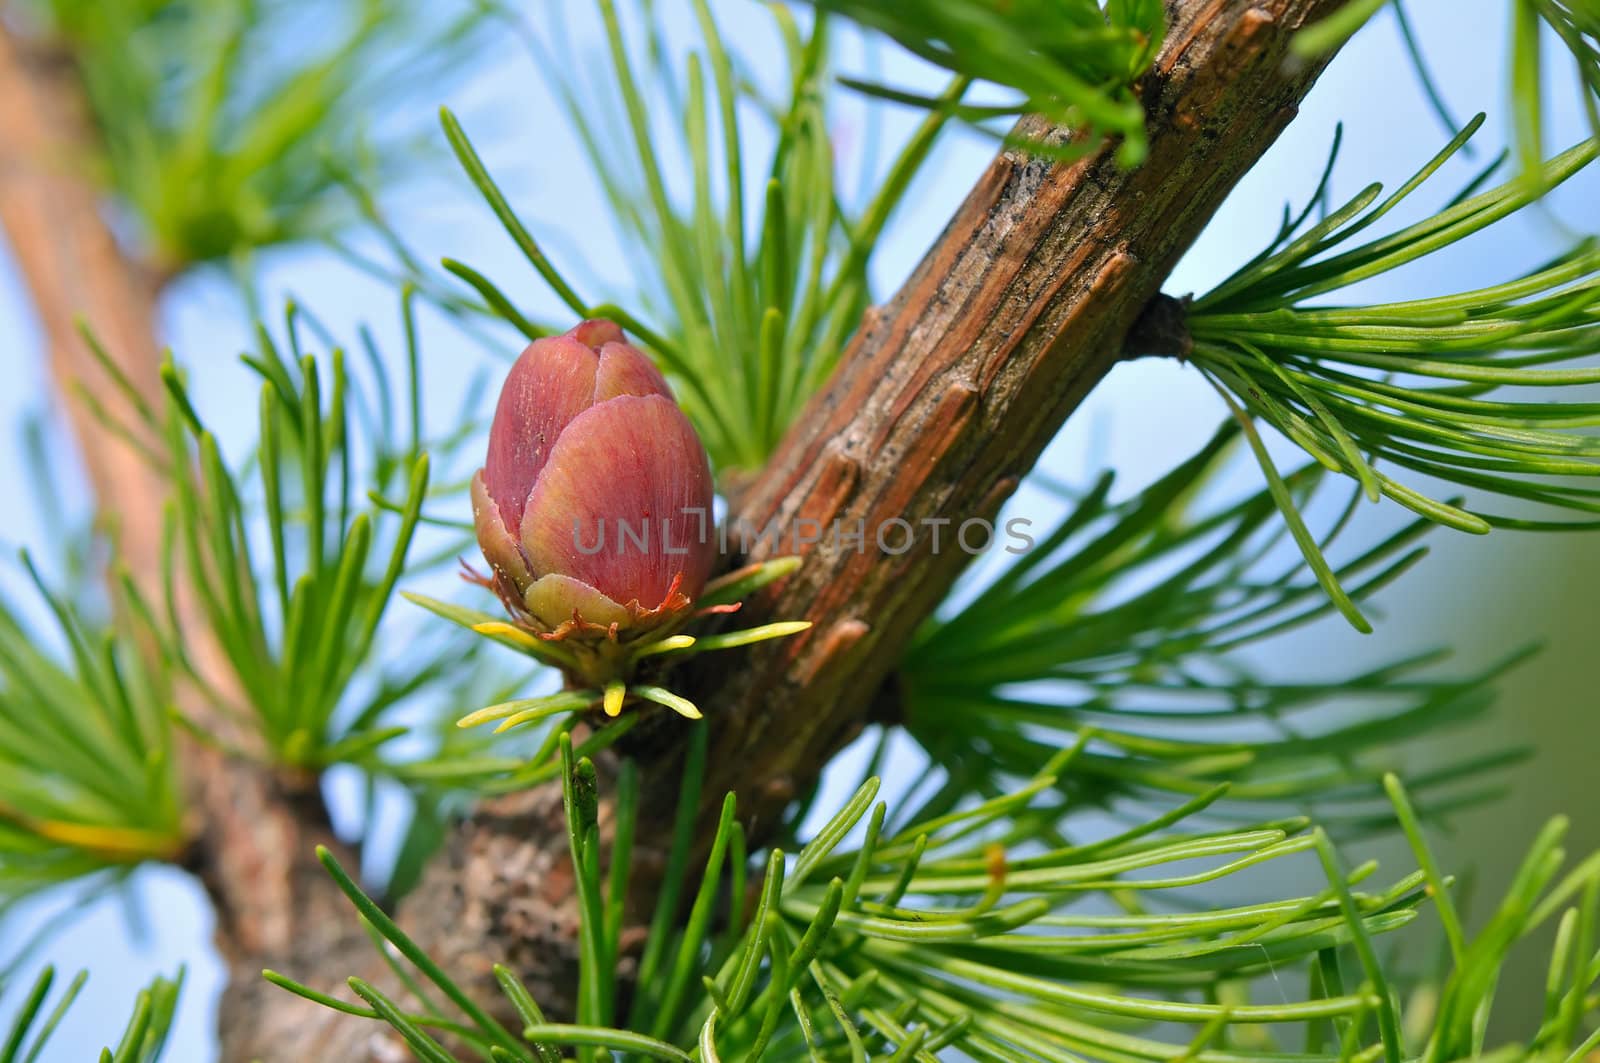 Red larch flower on a branch in summer